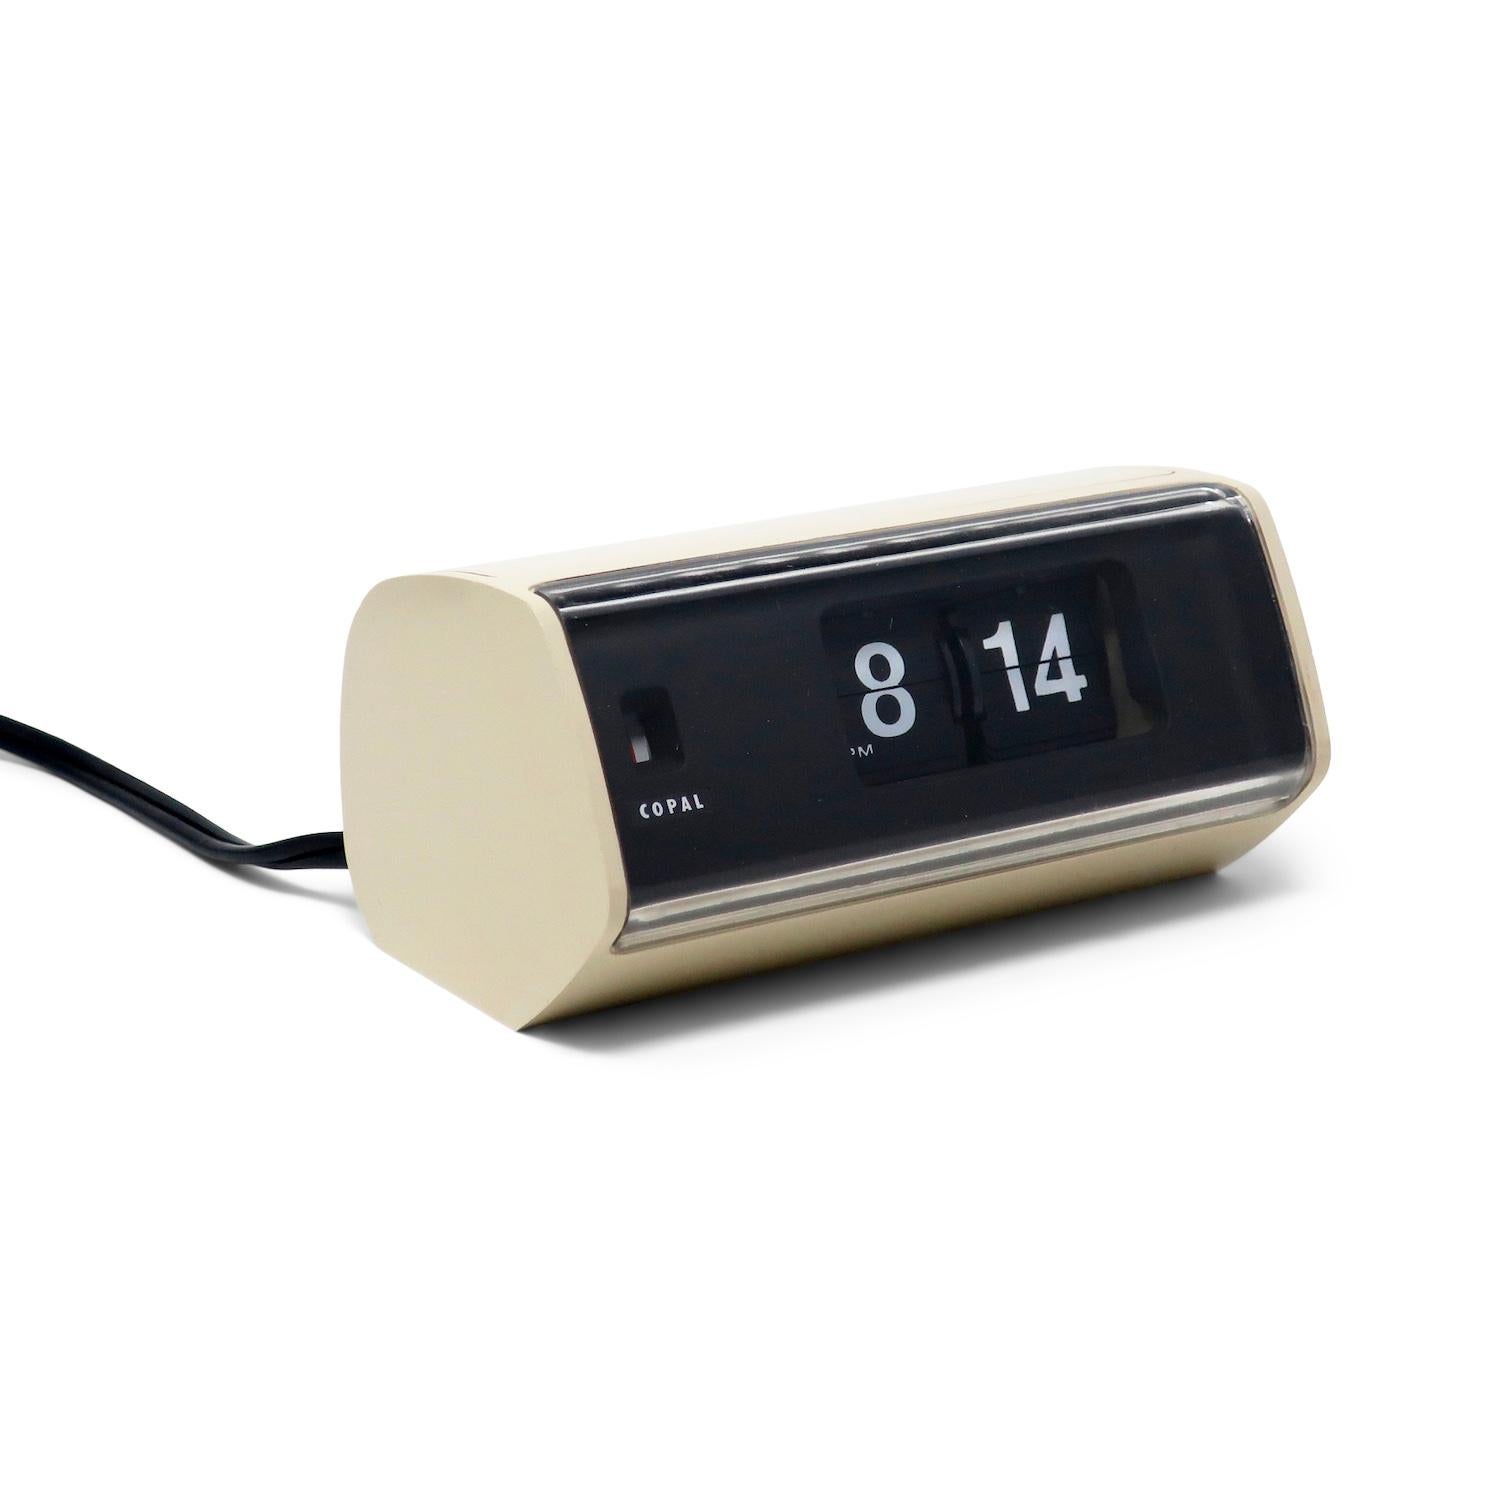 A Mid-Century Modern Copal Model 222 flip clock with off-white plastic case, black face, and clear plastic front. Minutes and hours flip as time passes, providing a satisfying quiet sound. Looks fantastic and works great!

In good vintage condition